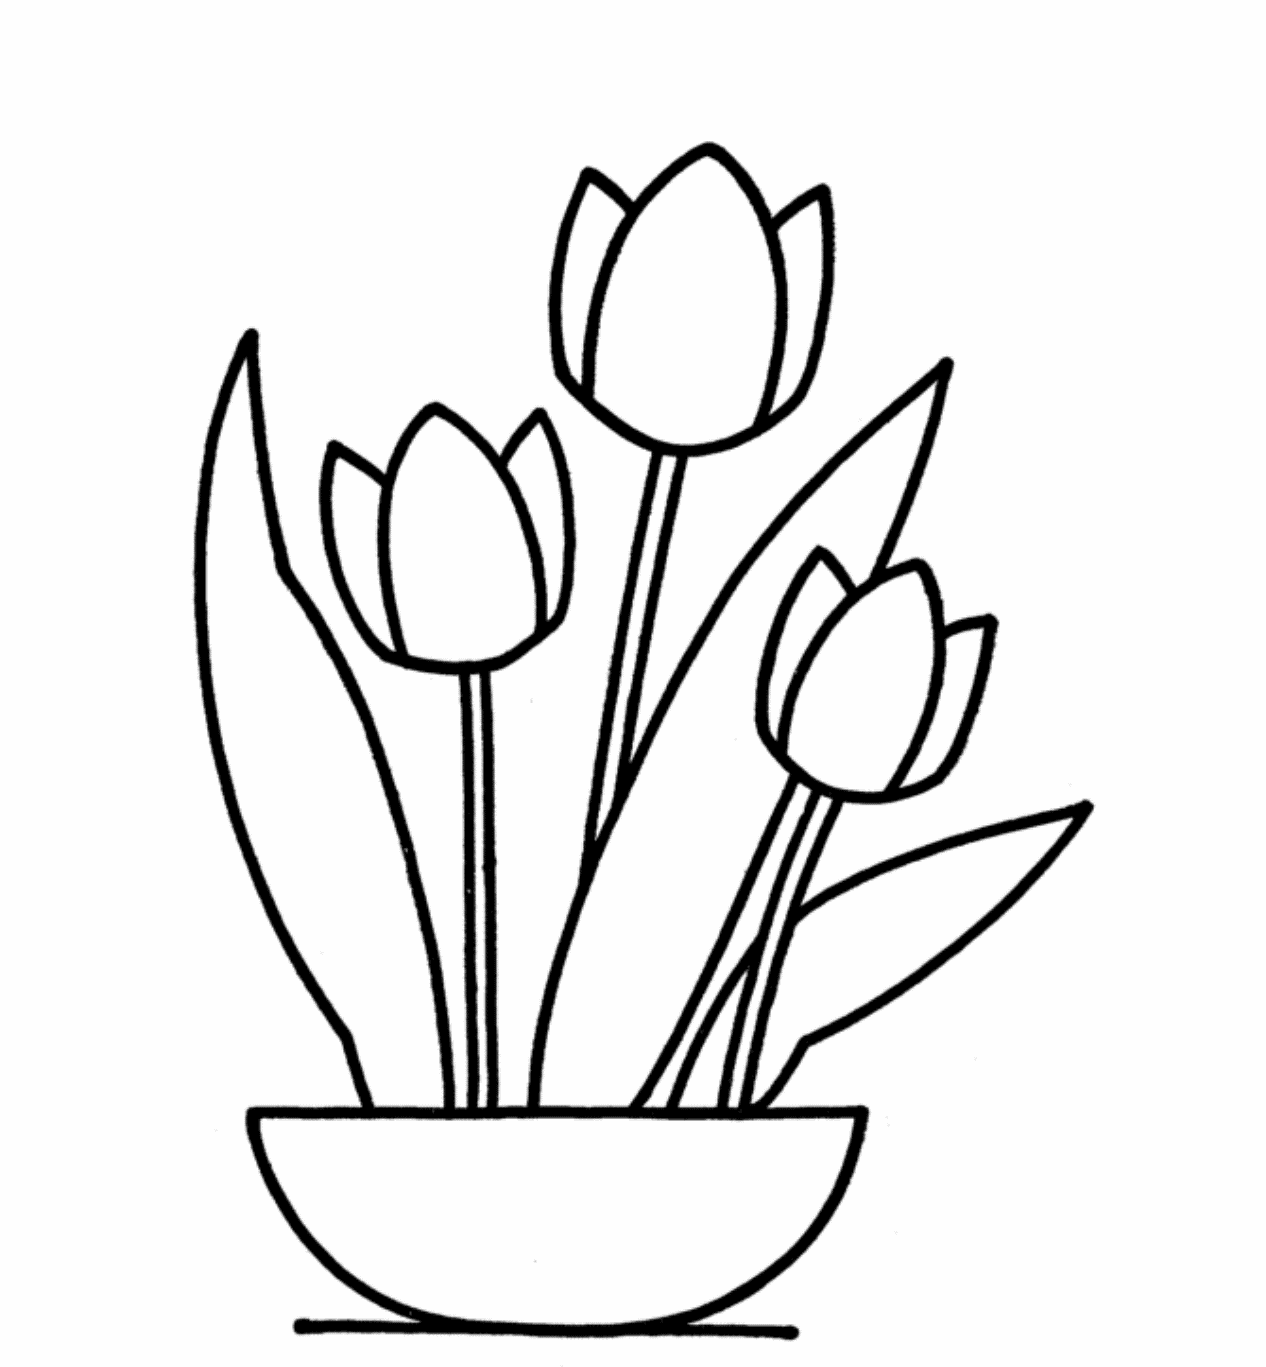 Tulip Flower Coloring Page